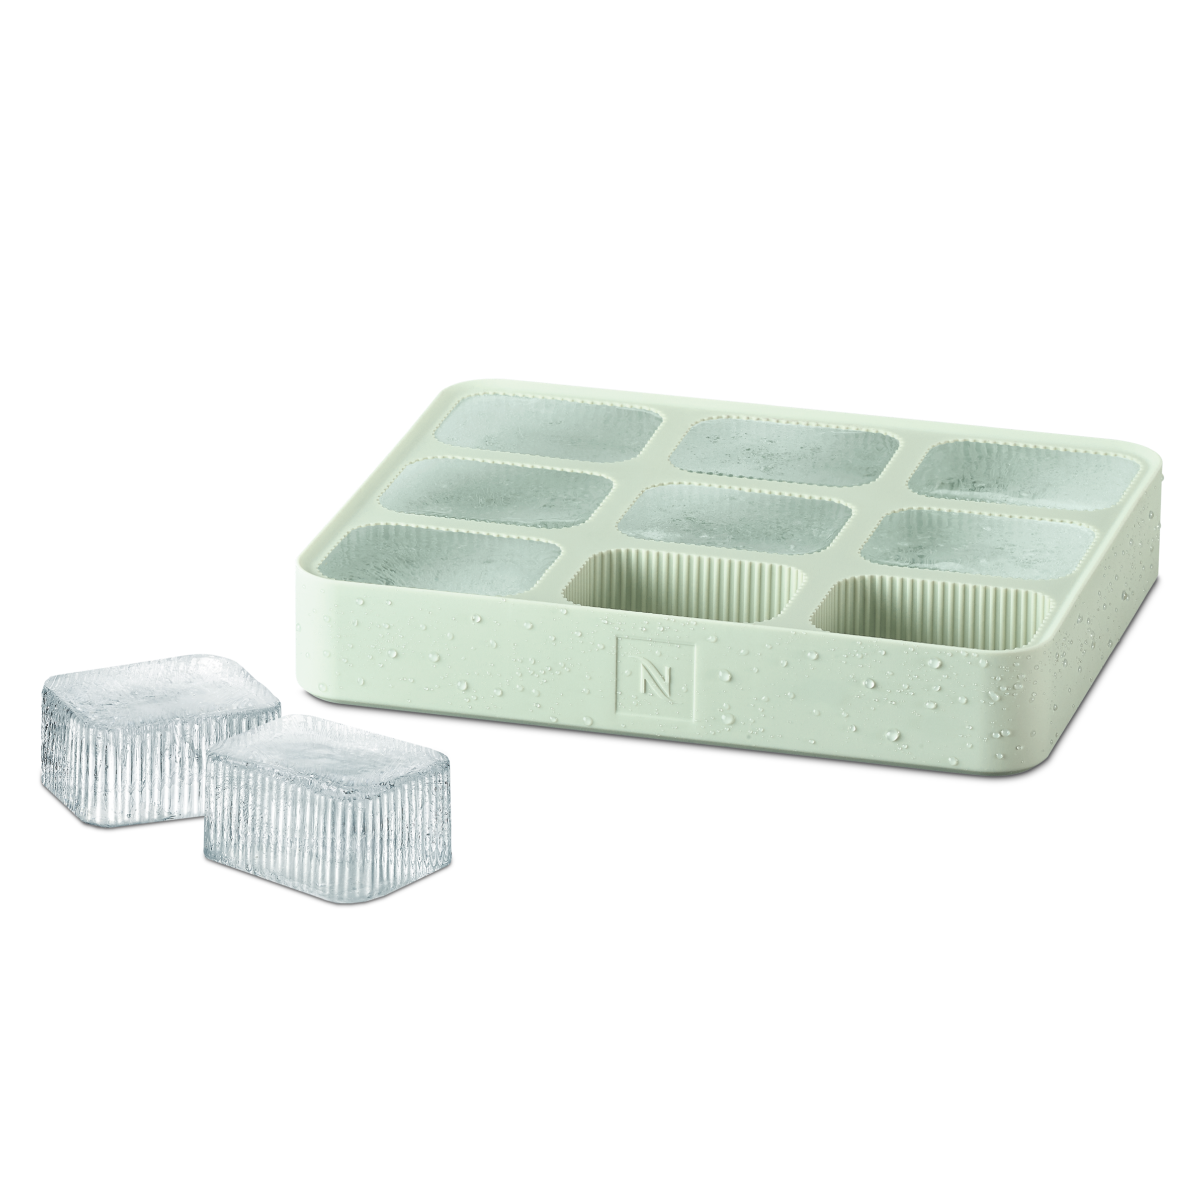 https://www.nespresso.com/shared_res/agility/global/accessories/collection/sku-main-info-product/barista-ice-tray-summer23_2x.png